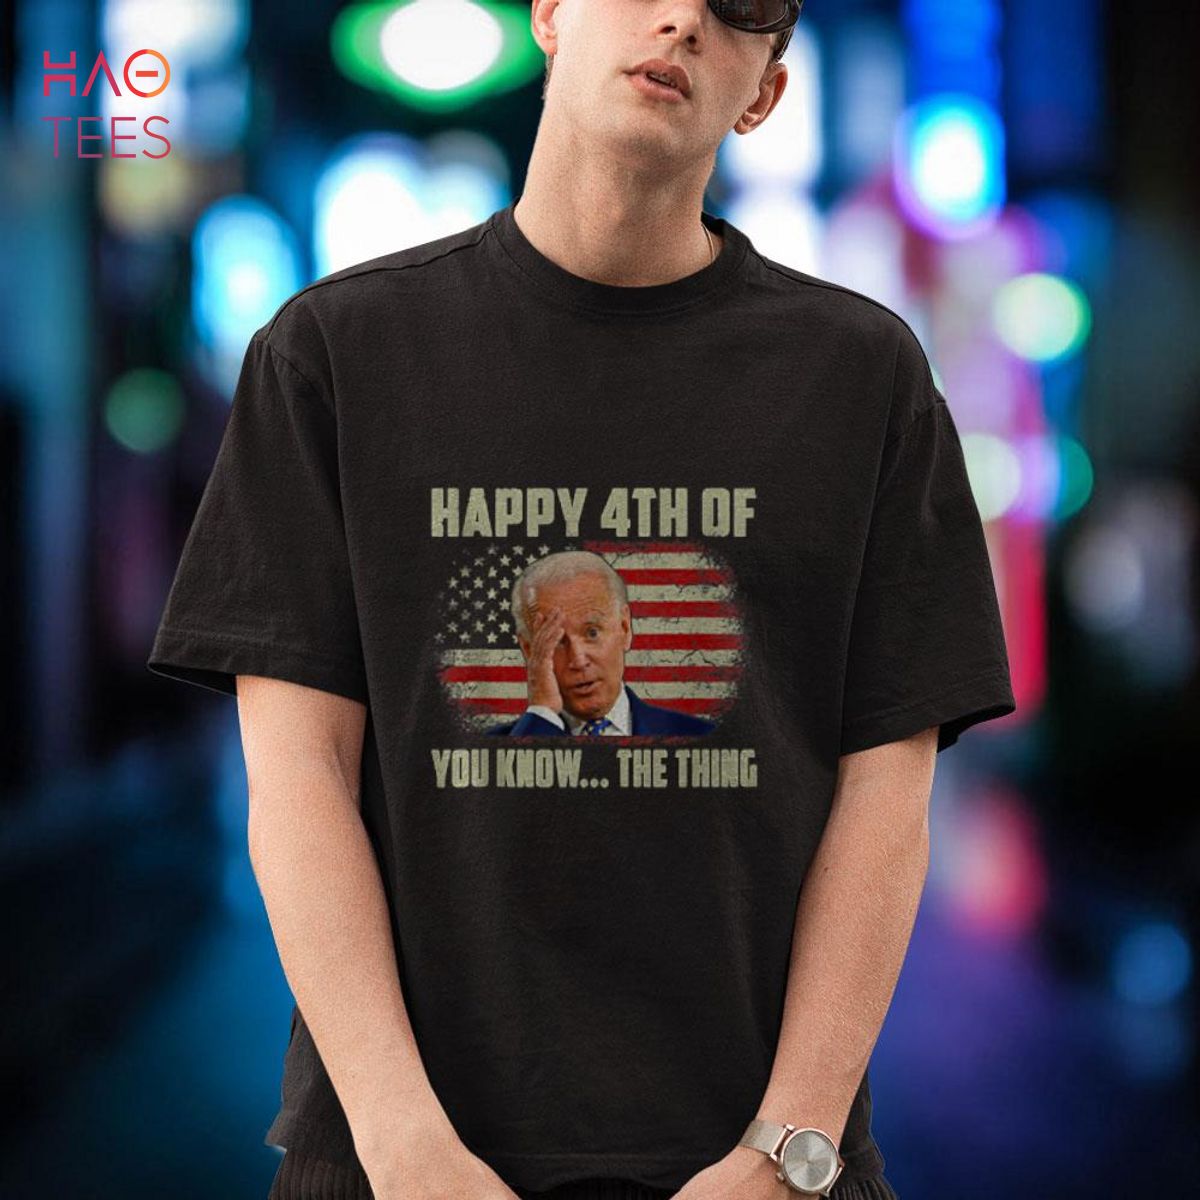 Biden Confused 4th Happy 4th of You Know…The Thing US Flag Shirt